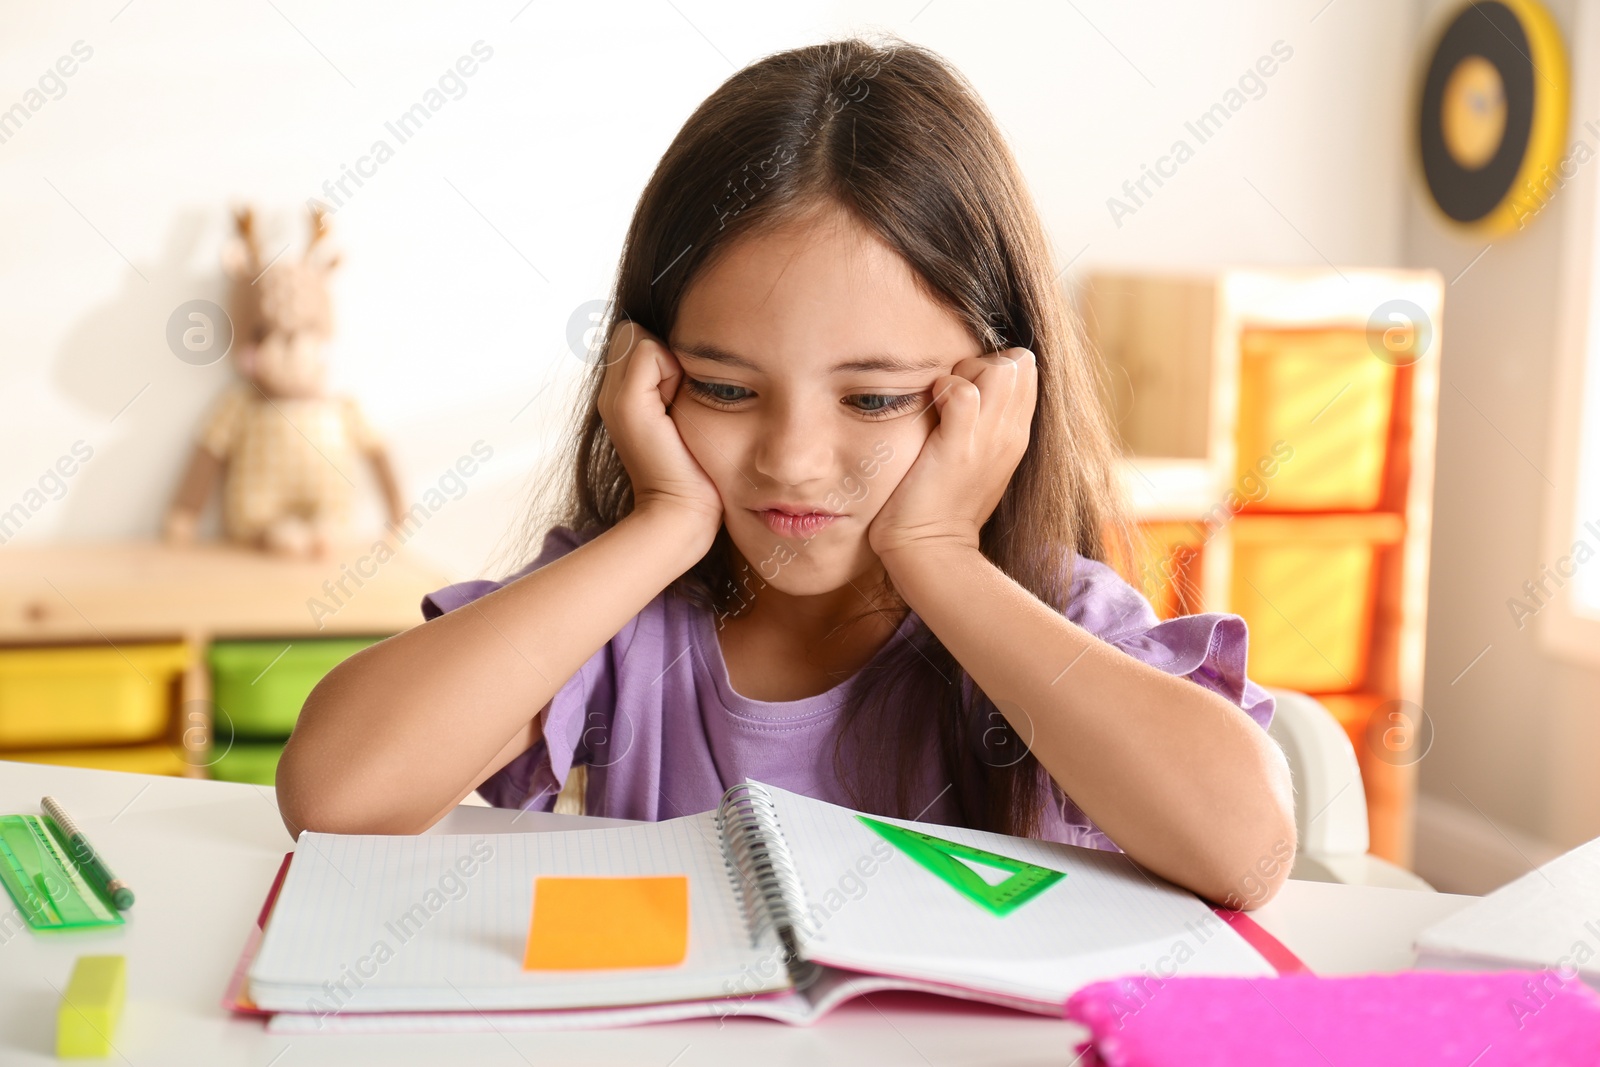 Photo of Emotional little girl doing homework at table indoors